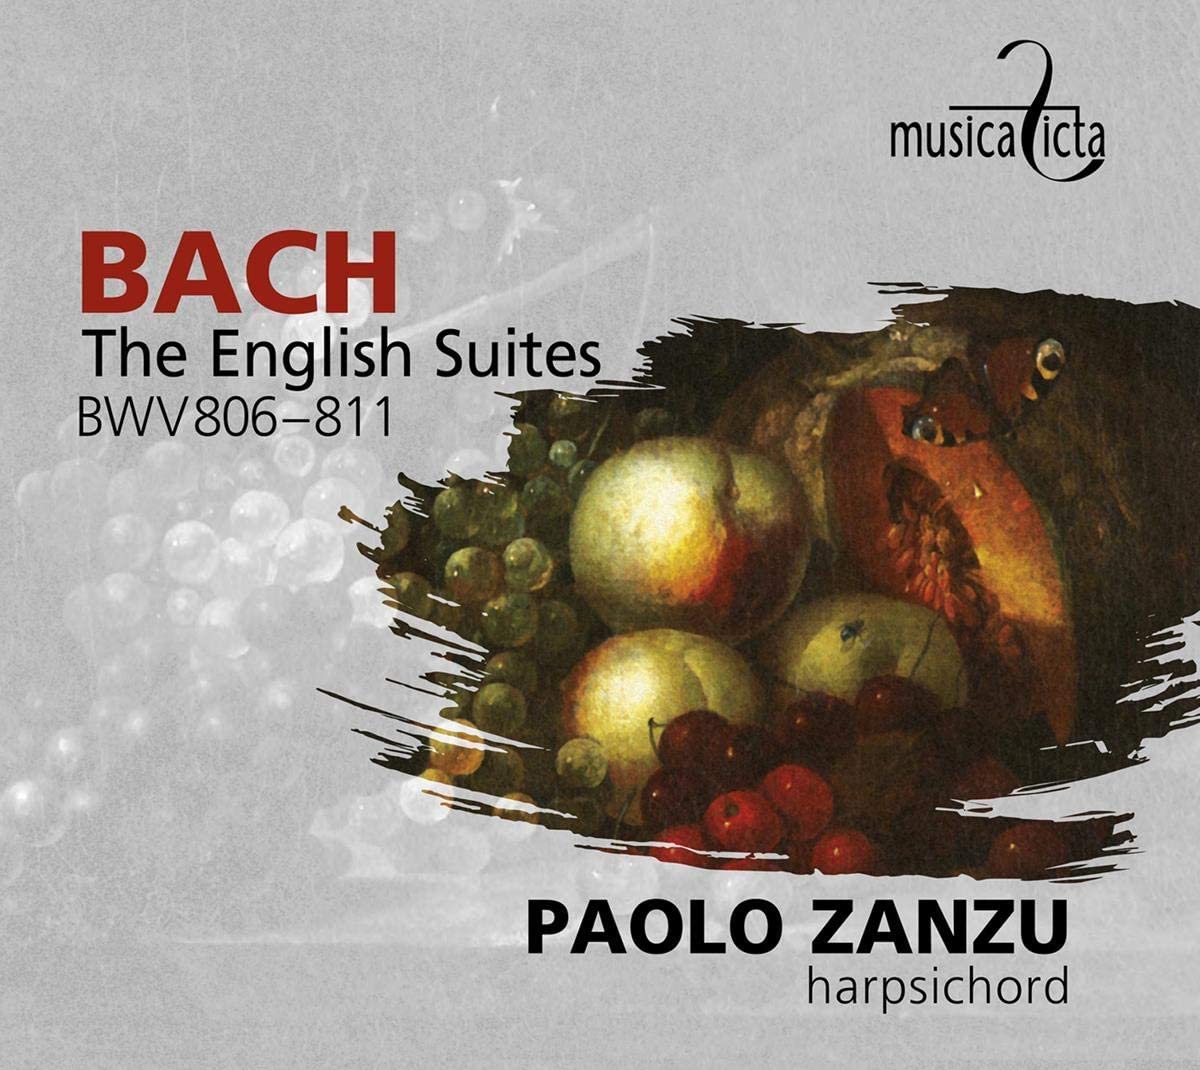 CD cover of Paolo Zanzu playing Bach's English Suites on harpsichord